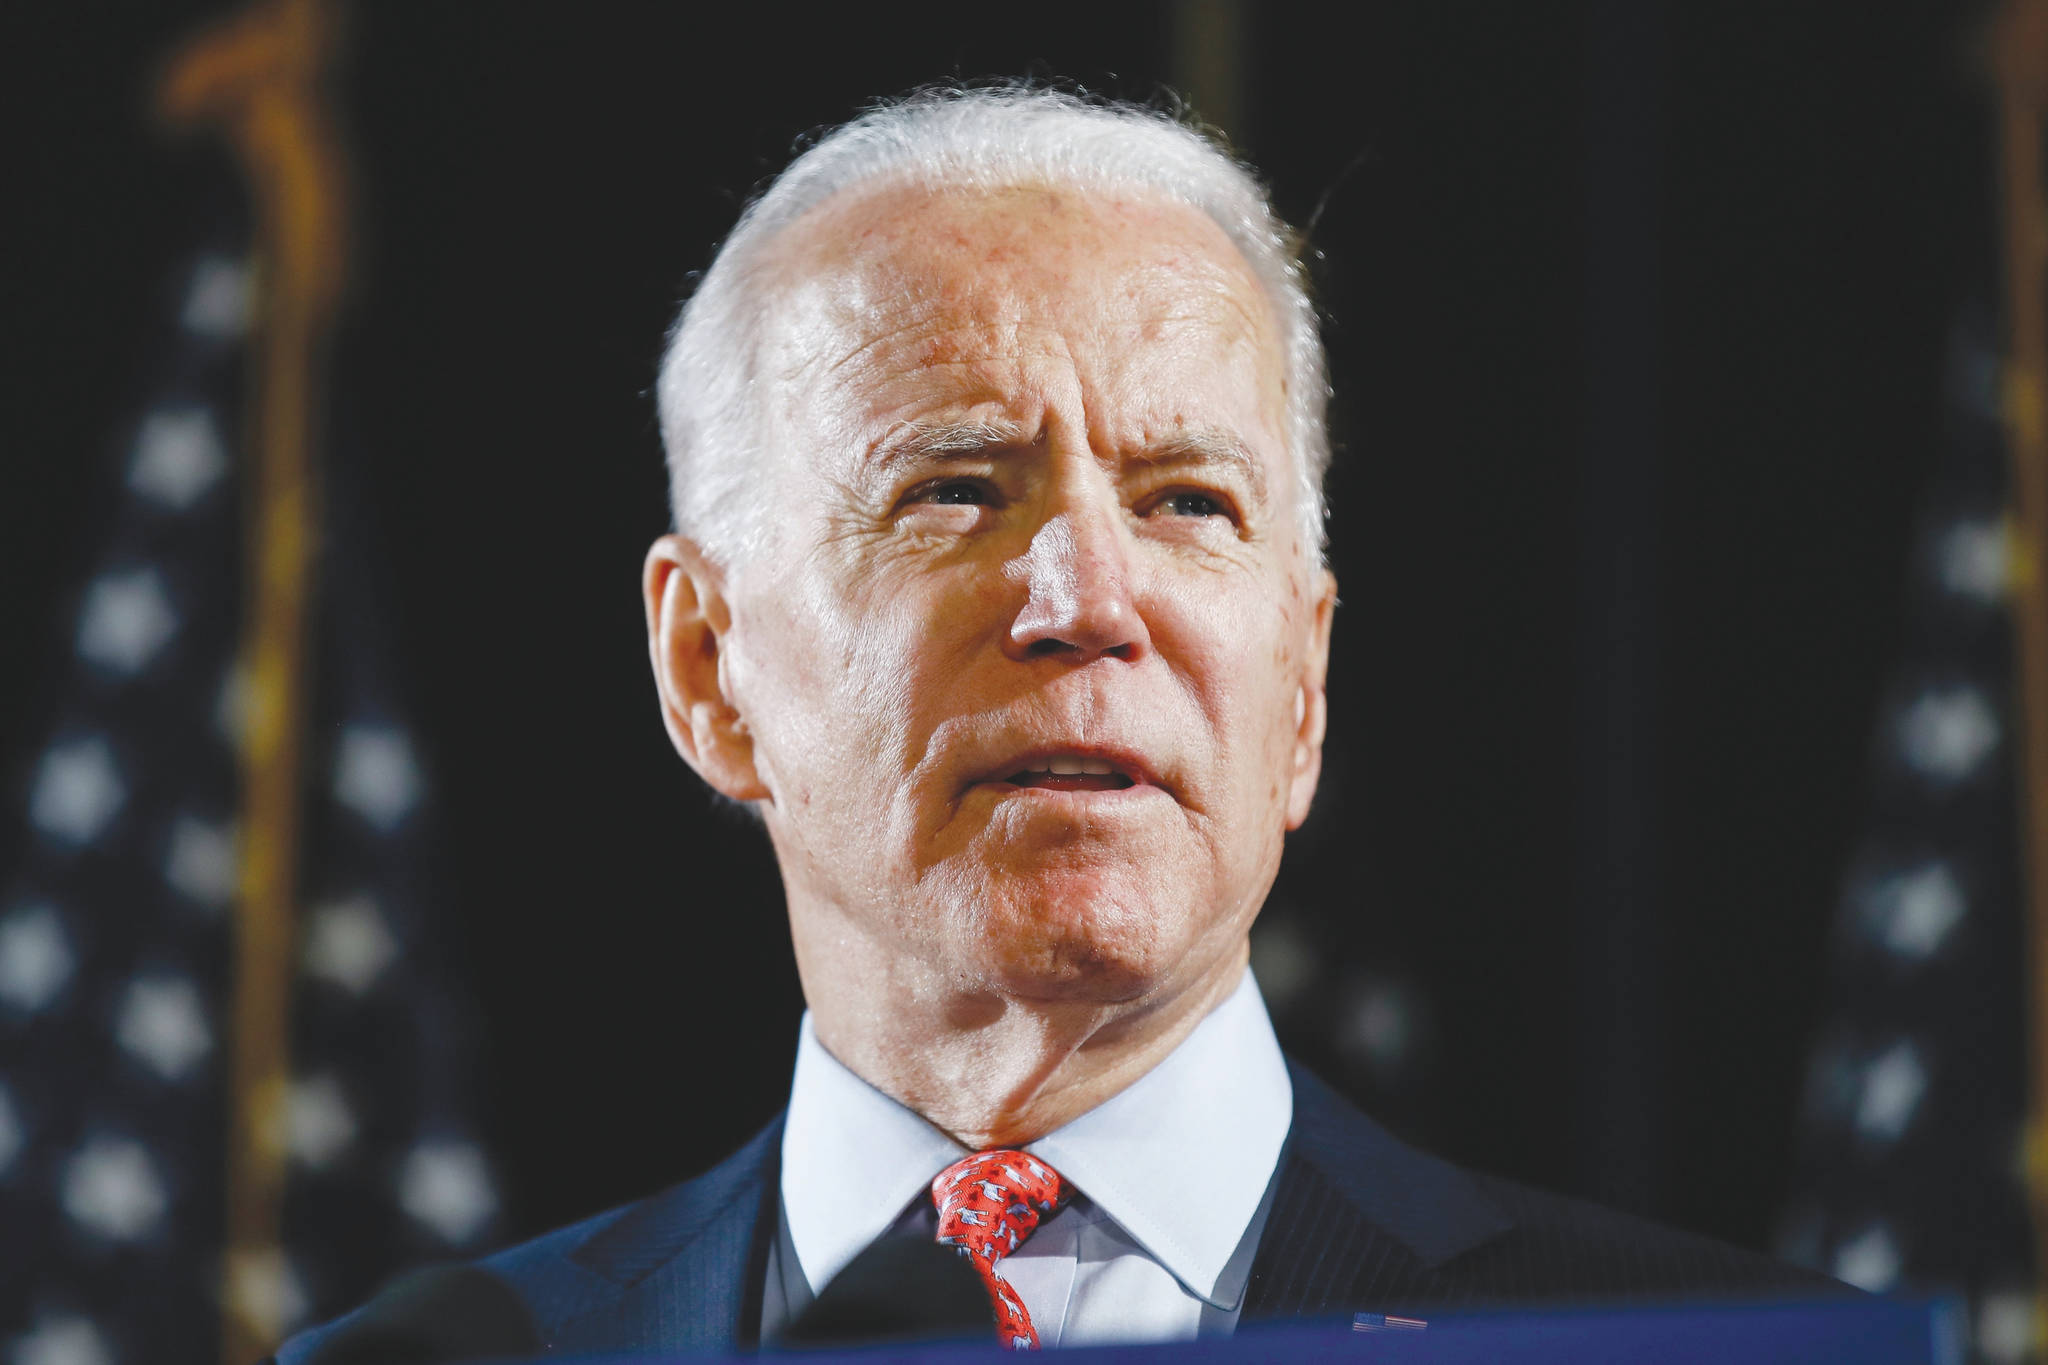 In this March 12 file photo, Democratic presidential candidate former Vice President Joe Biden speaks in Wilmington, Del. Democratic presidential candidate Joe Biden said on Sunday, Aug. 9, 2020, that if he’s elected, his administration would stop a proposed copper and gold mine in Alaska’s Bristol Bay region. The mine would be built near headwaters of the Bristol Bay salmon fishery about 200 miles southwest of Anchorage. Conservation and local tribal groups say they fear the mine will devastate the fishery. (AP Photo/Matt Rourke, File)